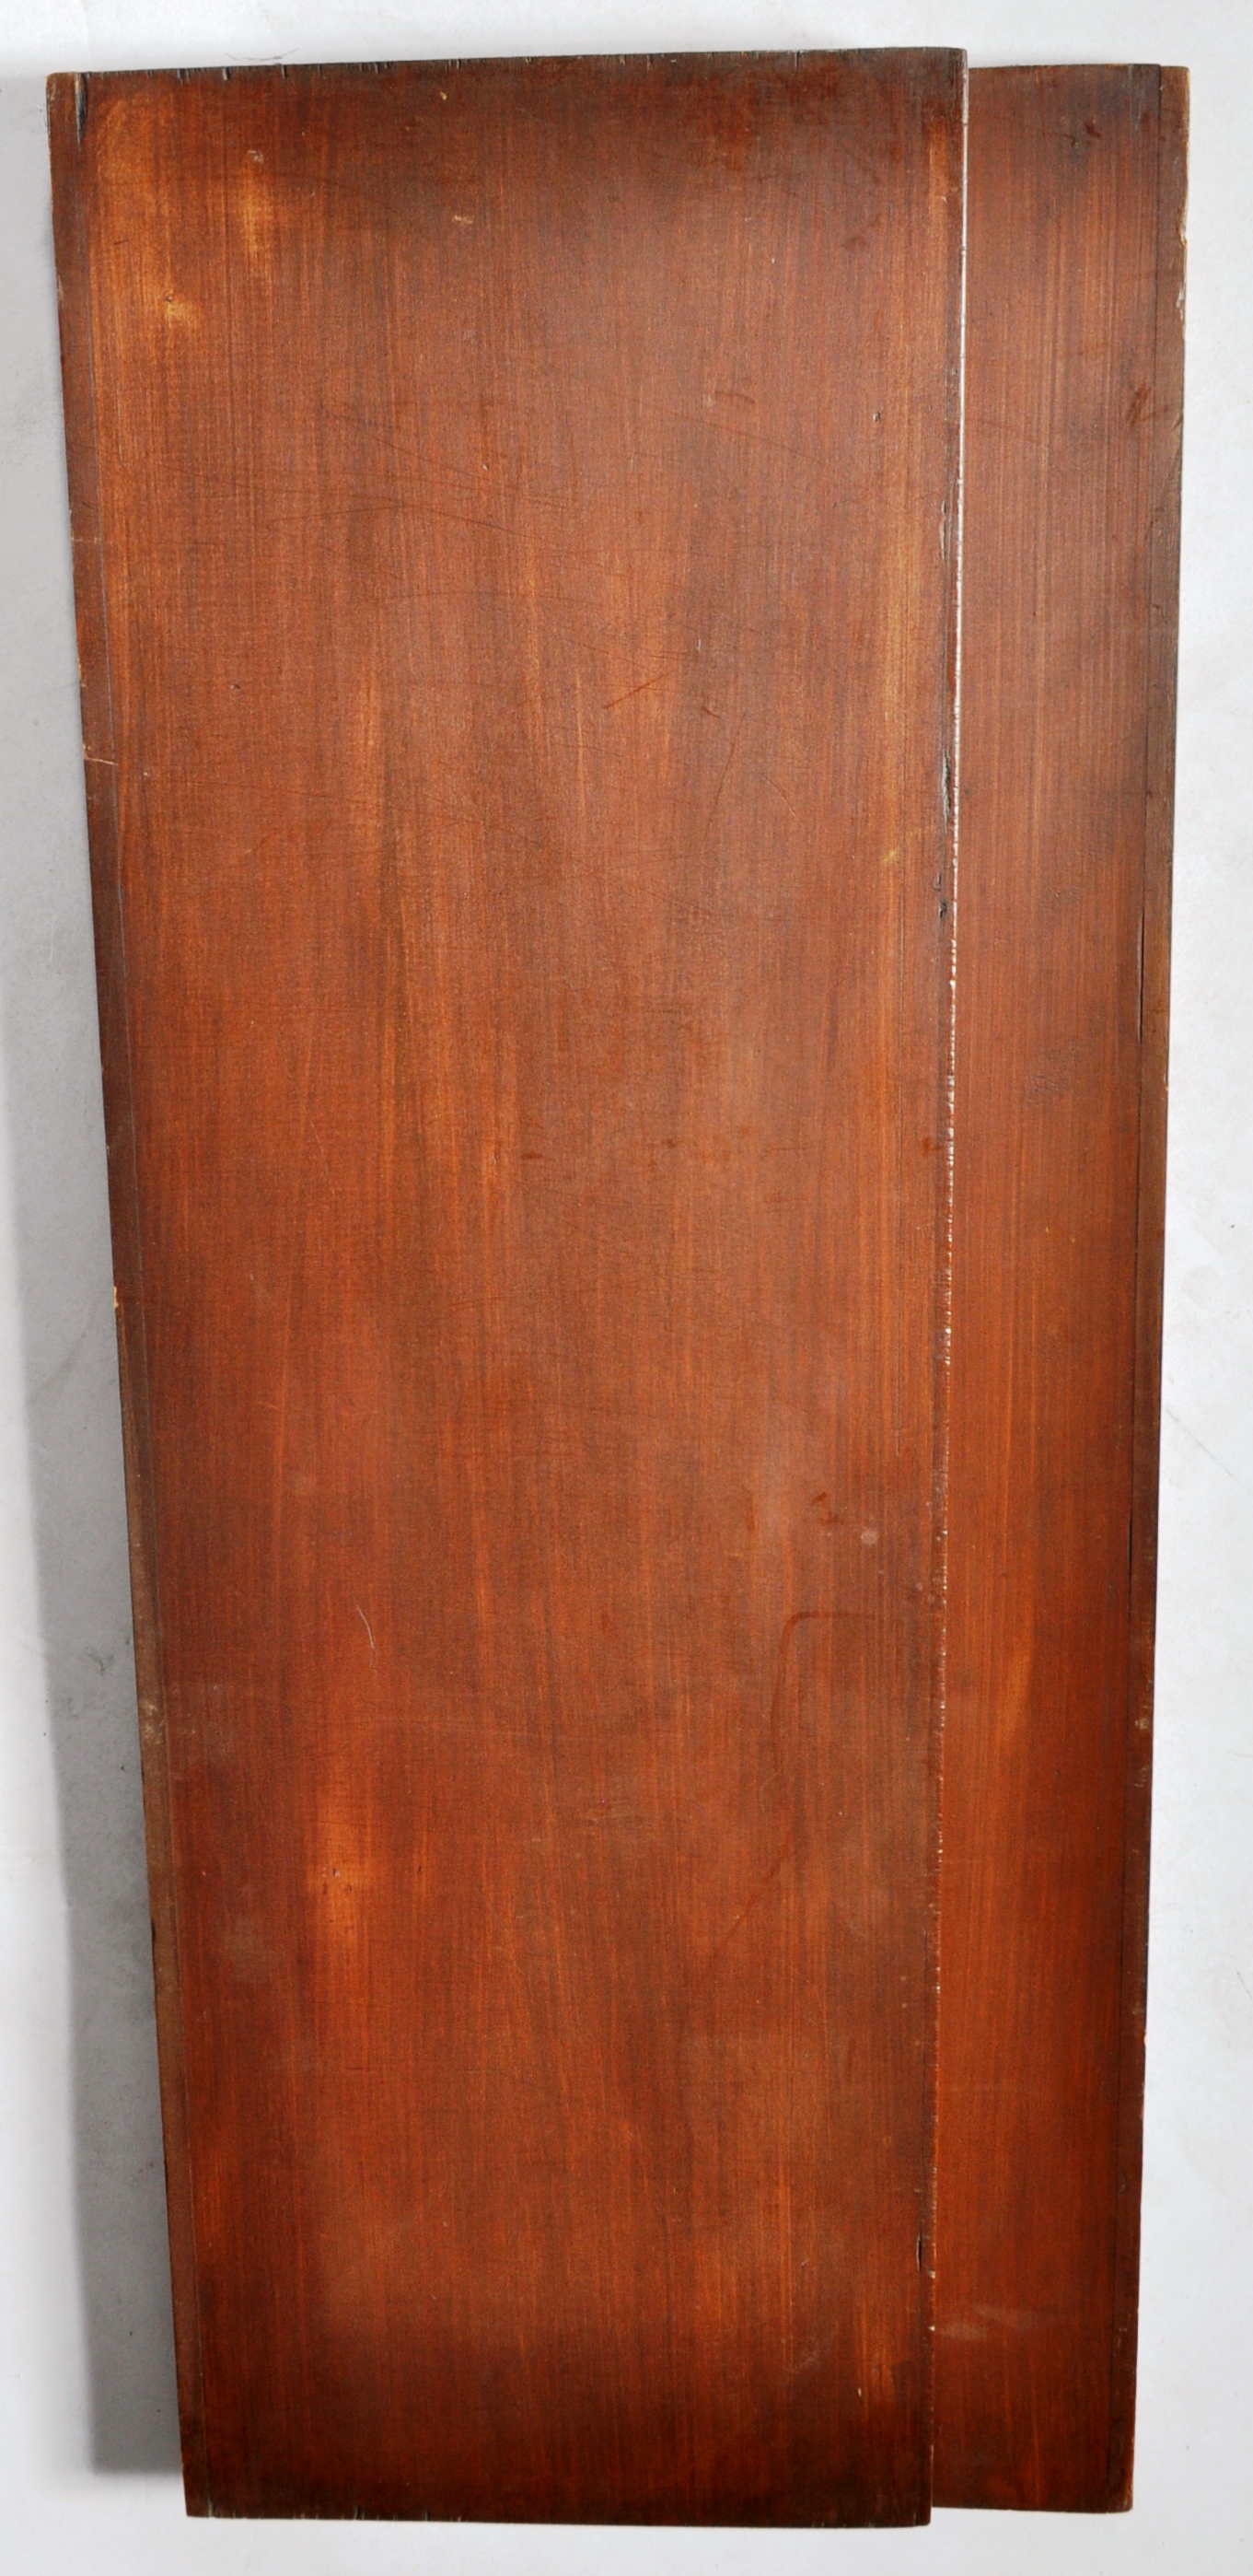 LARGE 19TH CENTURY VICTORIAN MAHOGANY LIBRARY BOOKCASE - Image 7 of 7